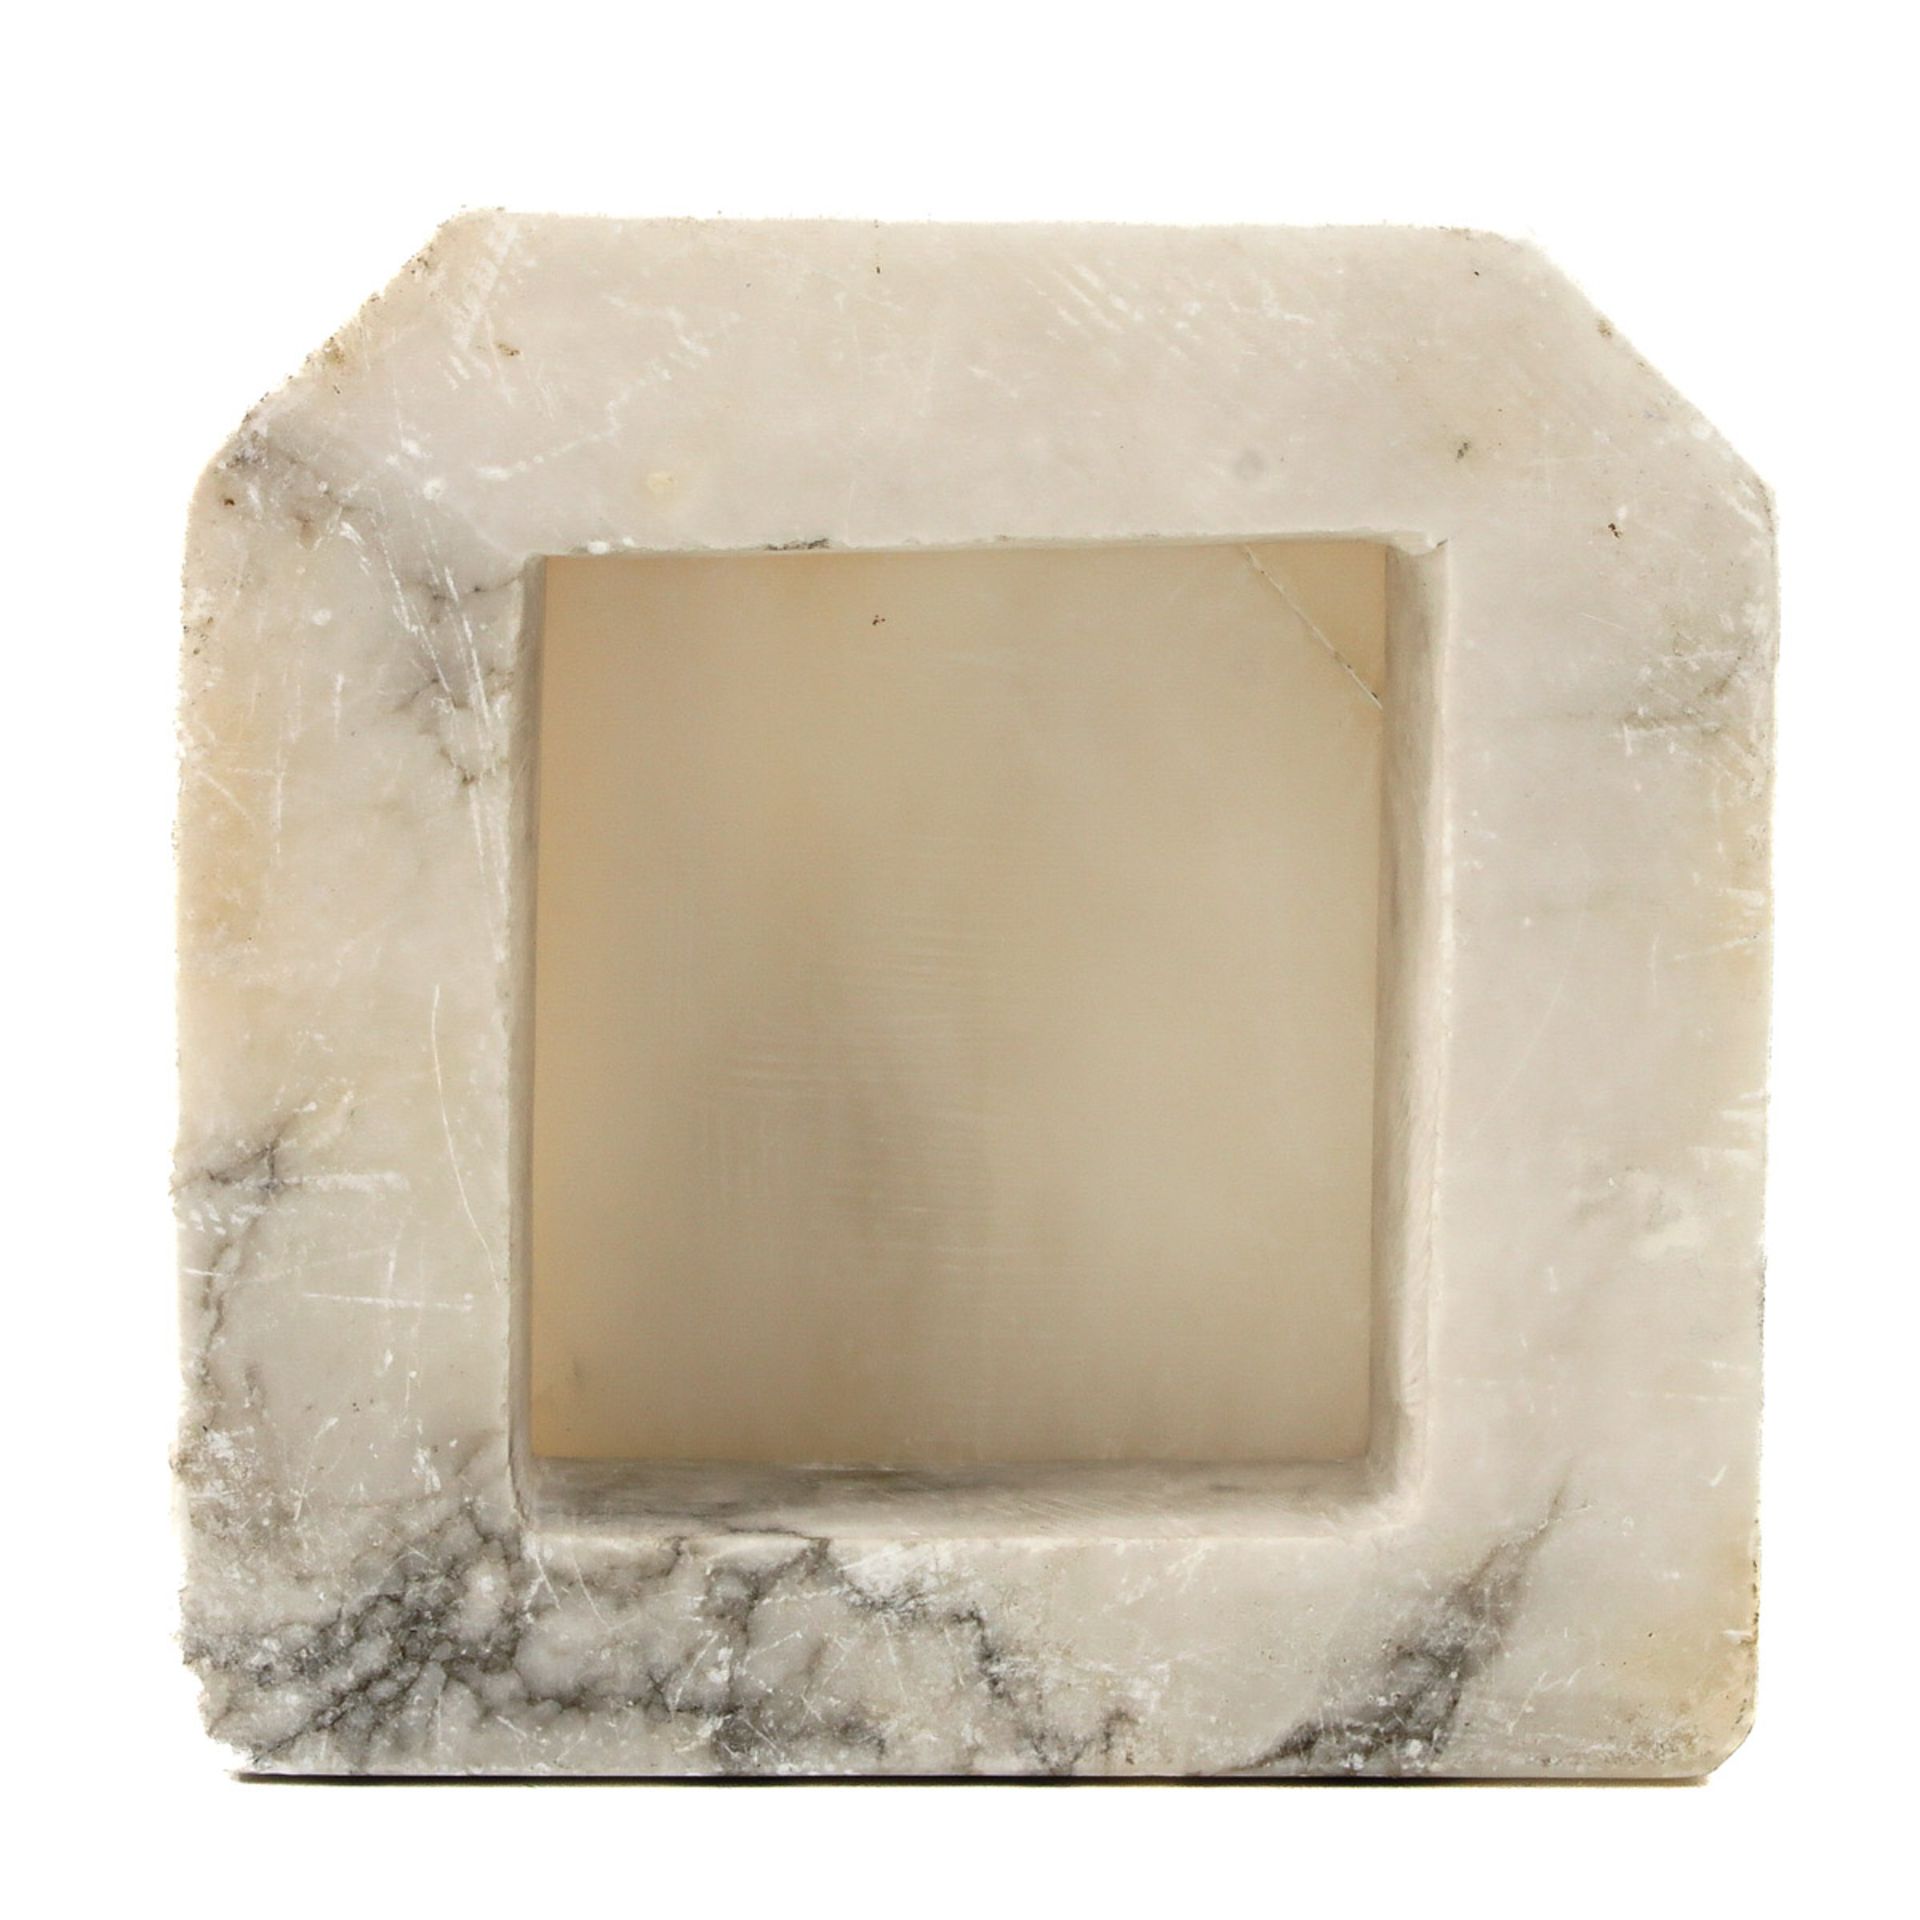 A Marble Sculpture - Image 6 of 9